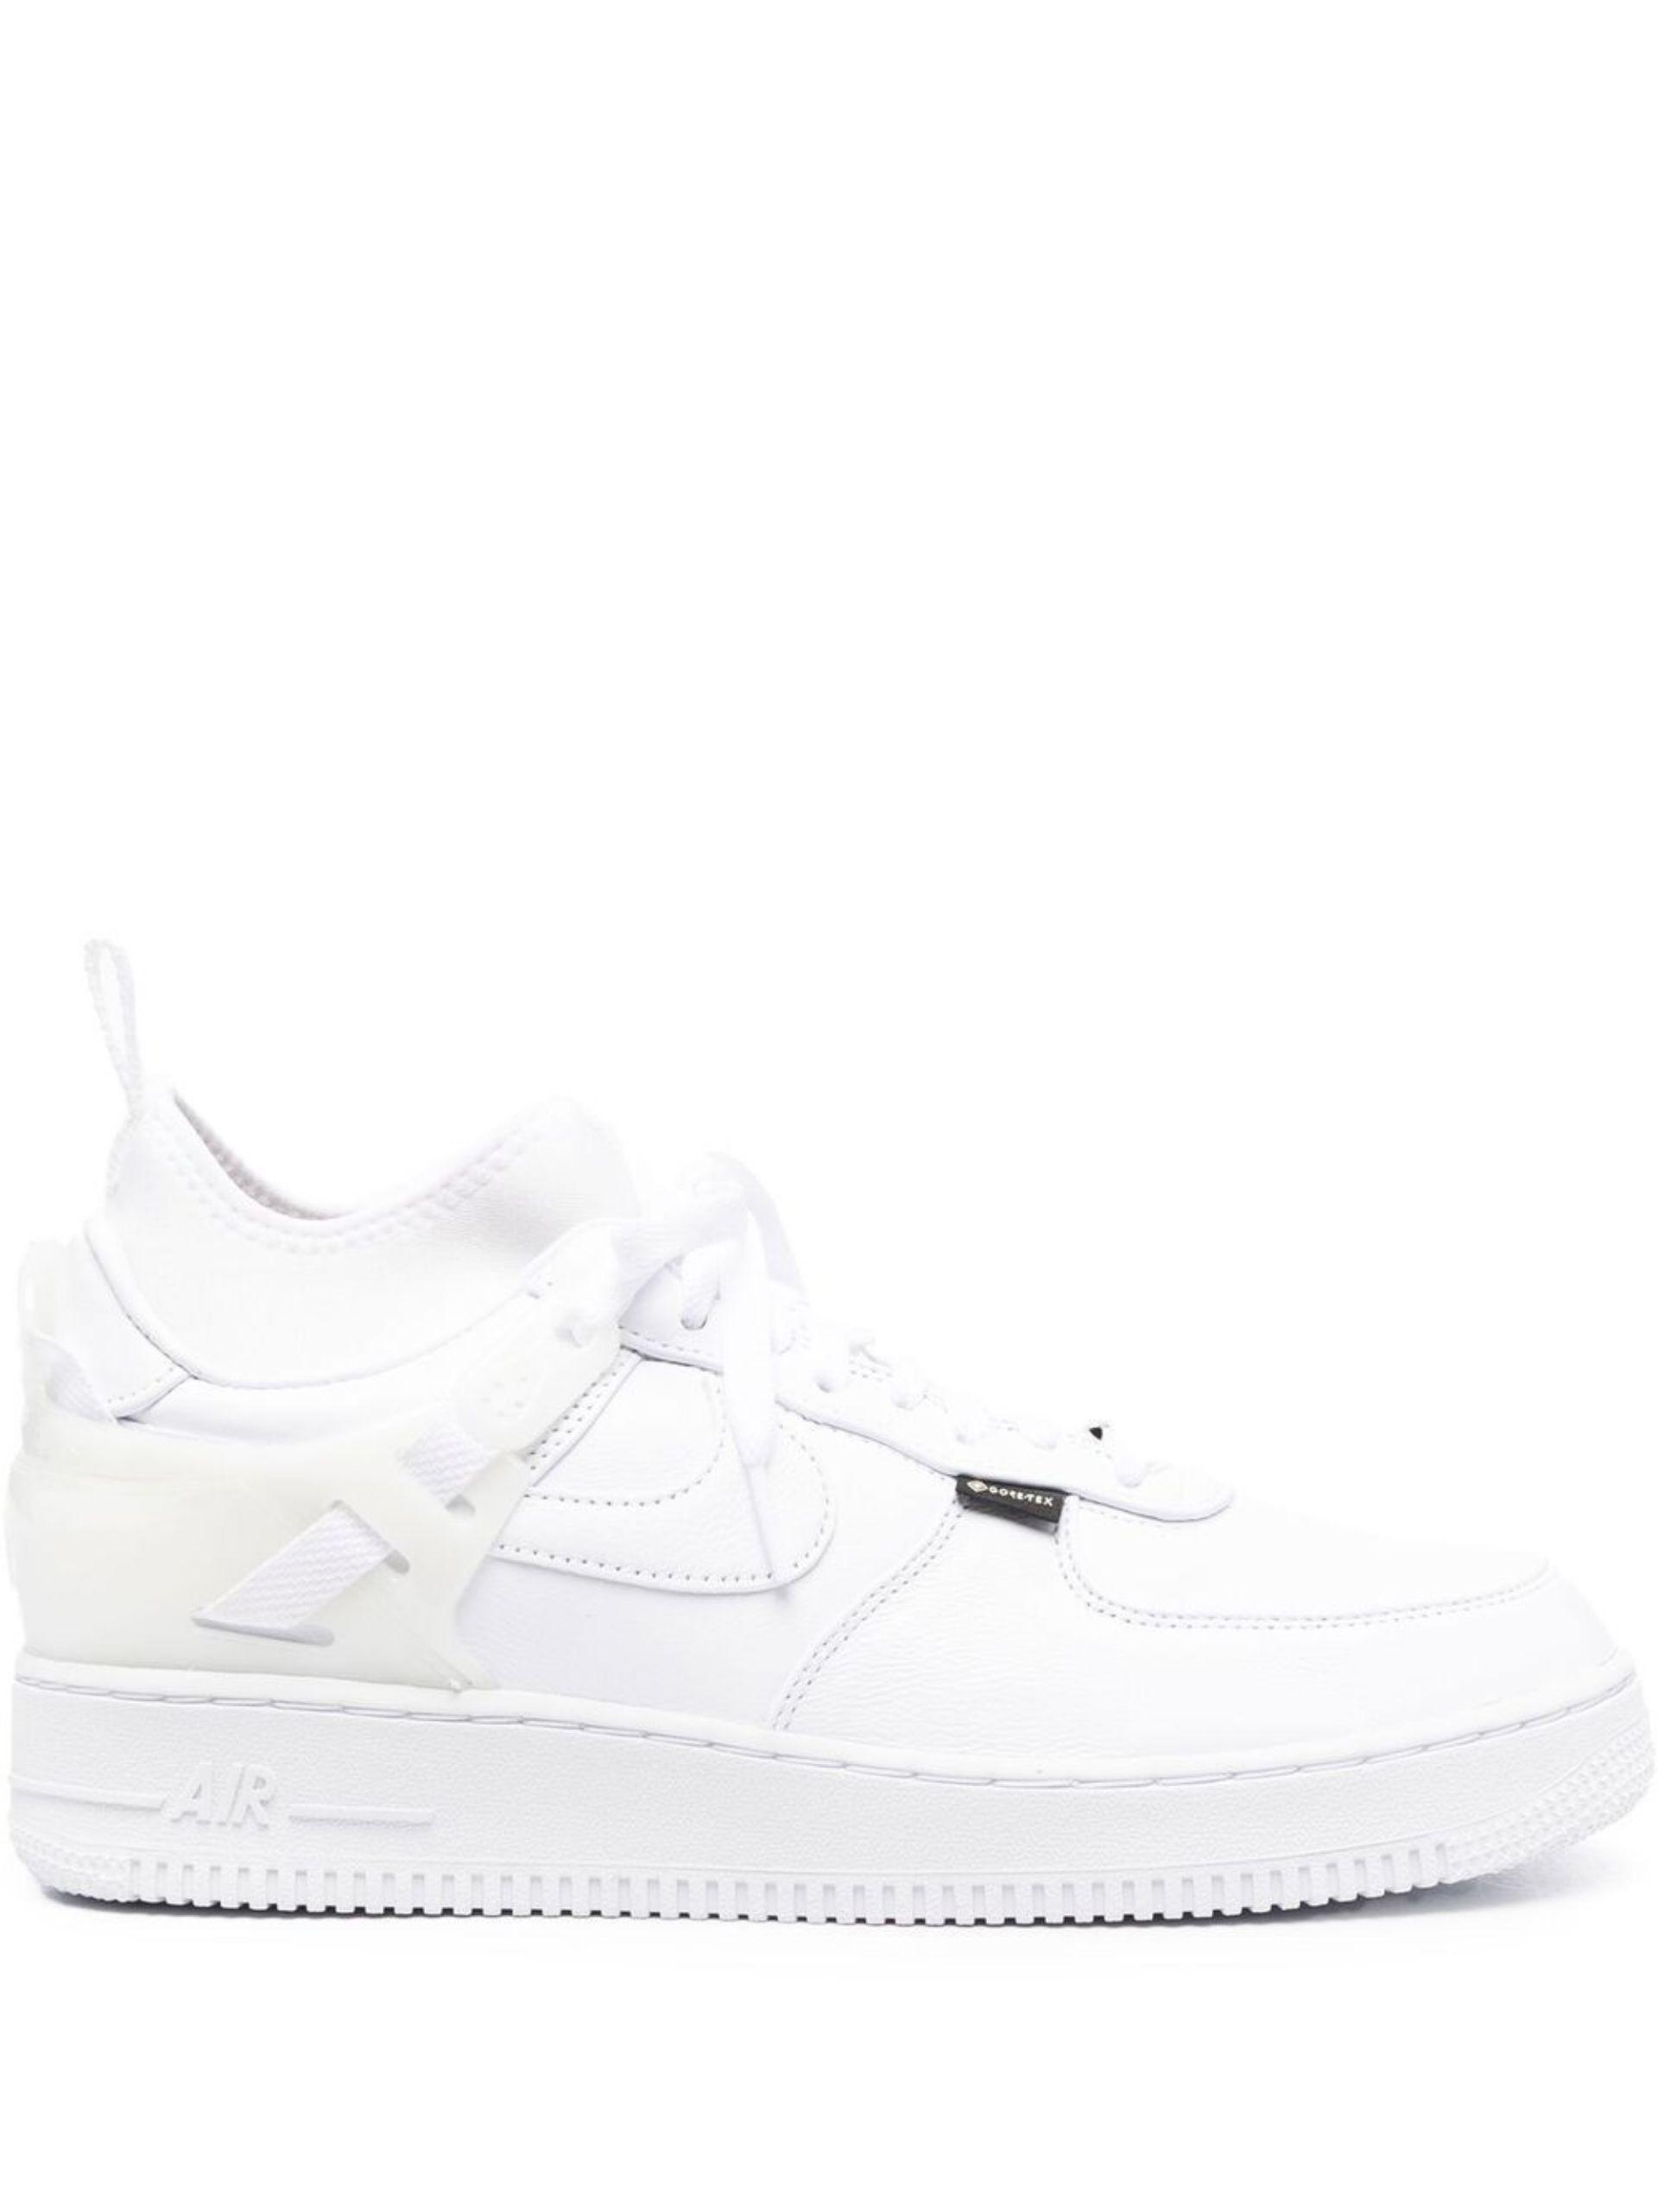 Nike Air Force 1 Low Sp X Undercover Shoes in White | Lyst